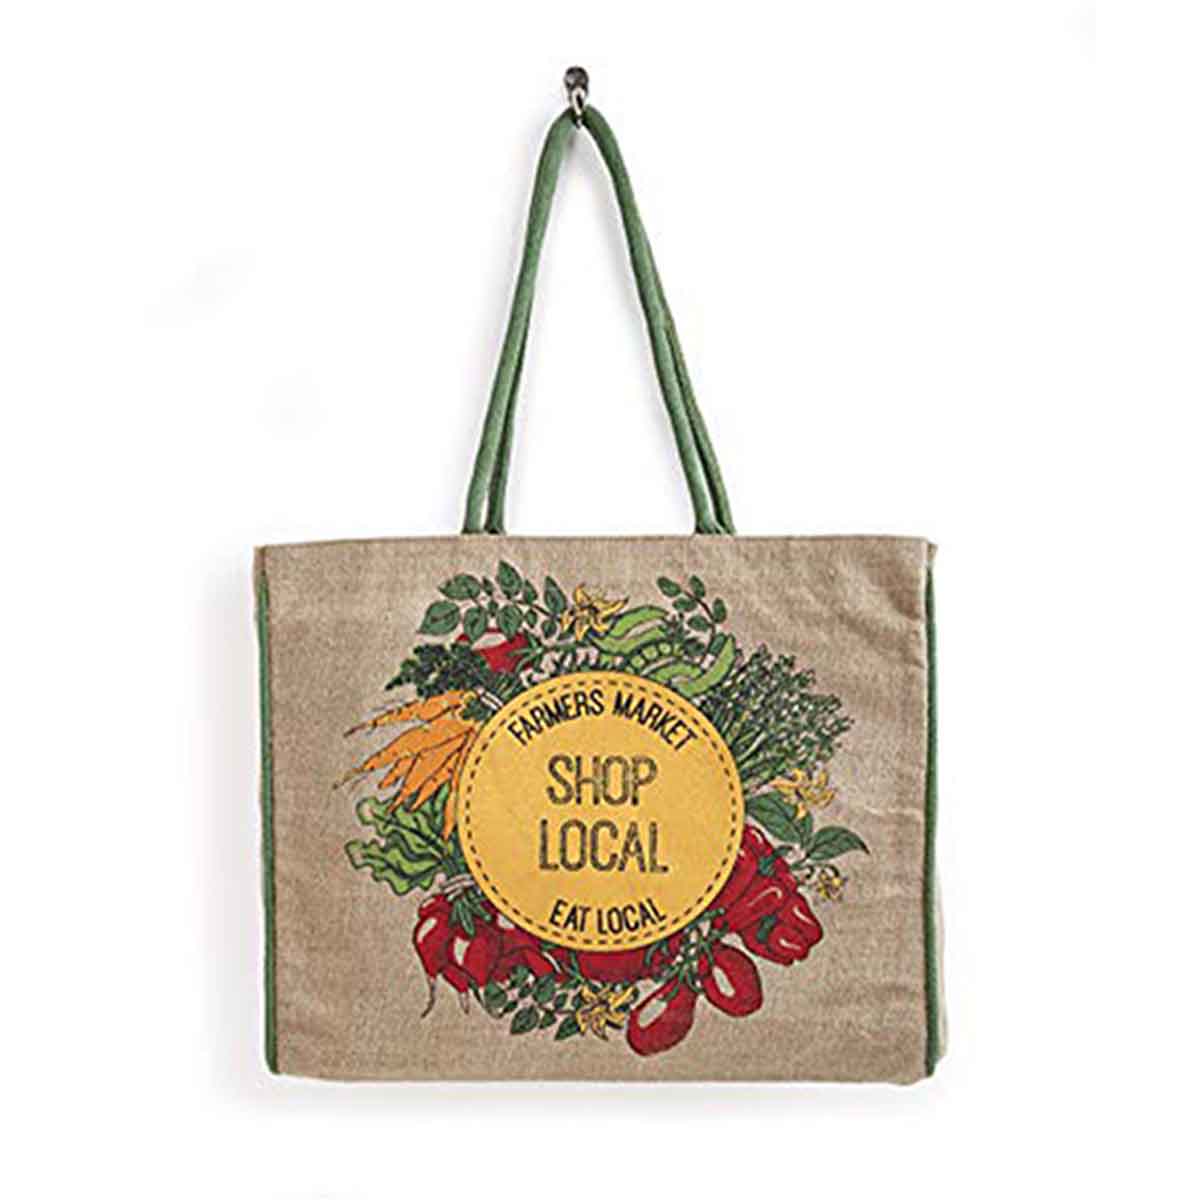 Mona B Reusable Jute Shopping Bag With Stylish Design for Men and Women (Shop Local)